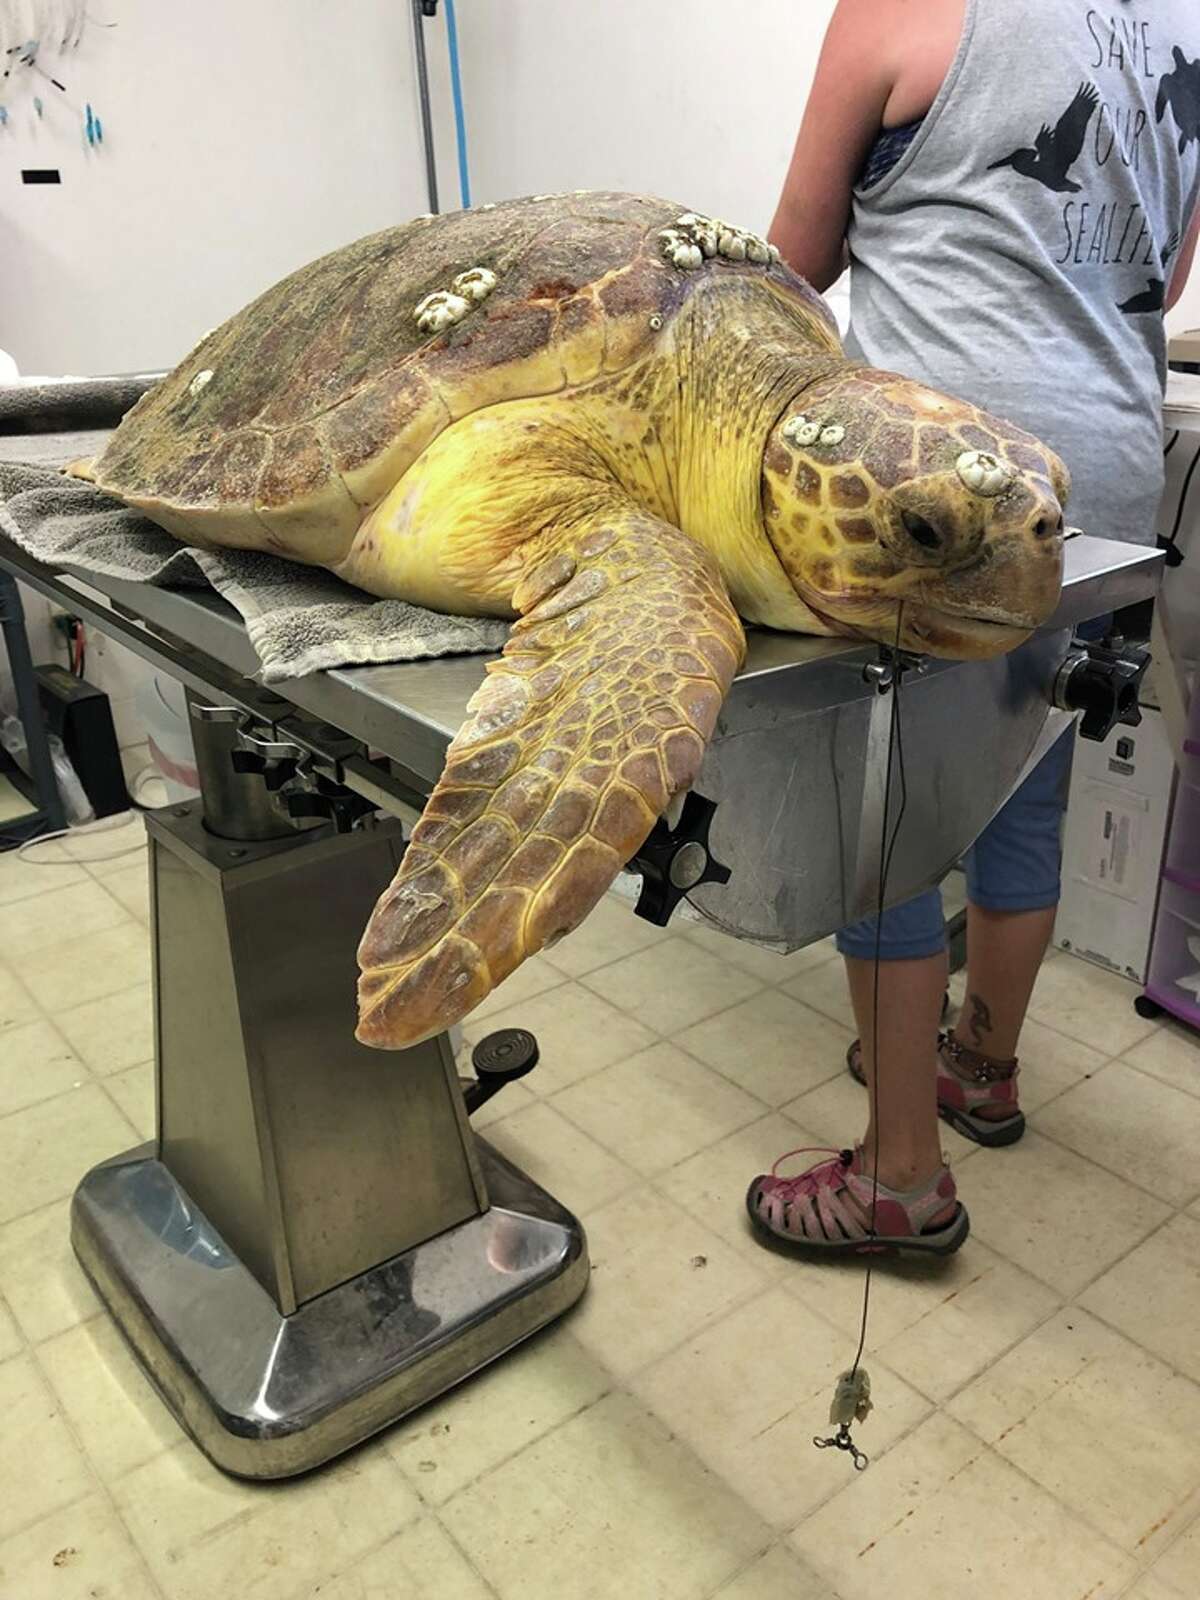 Captain is a sub adult Loggerhead sea turtle who was brought into care on May 19, 2019 from Bob Hall Pier, after swallowing a large fishing hook. Source: Texas Sealife Center